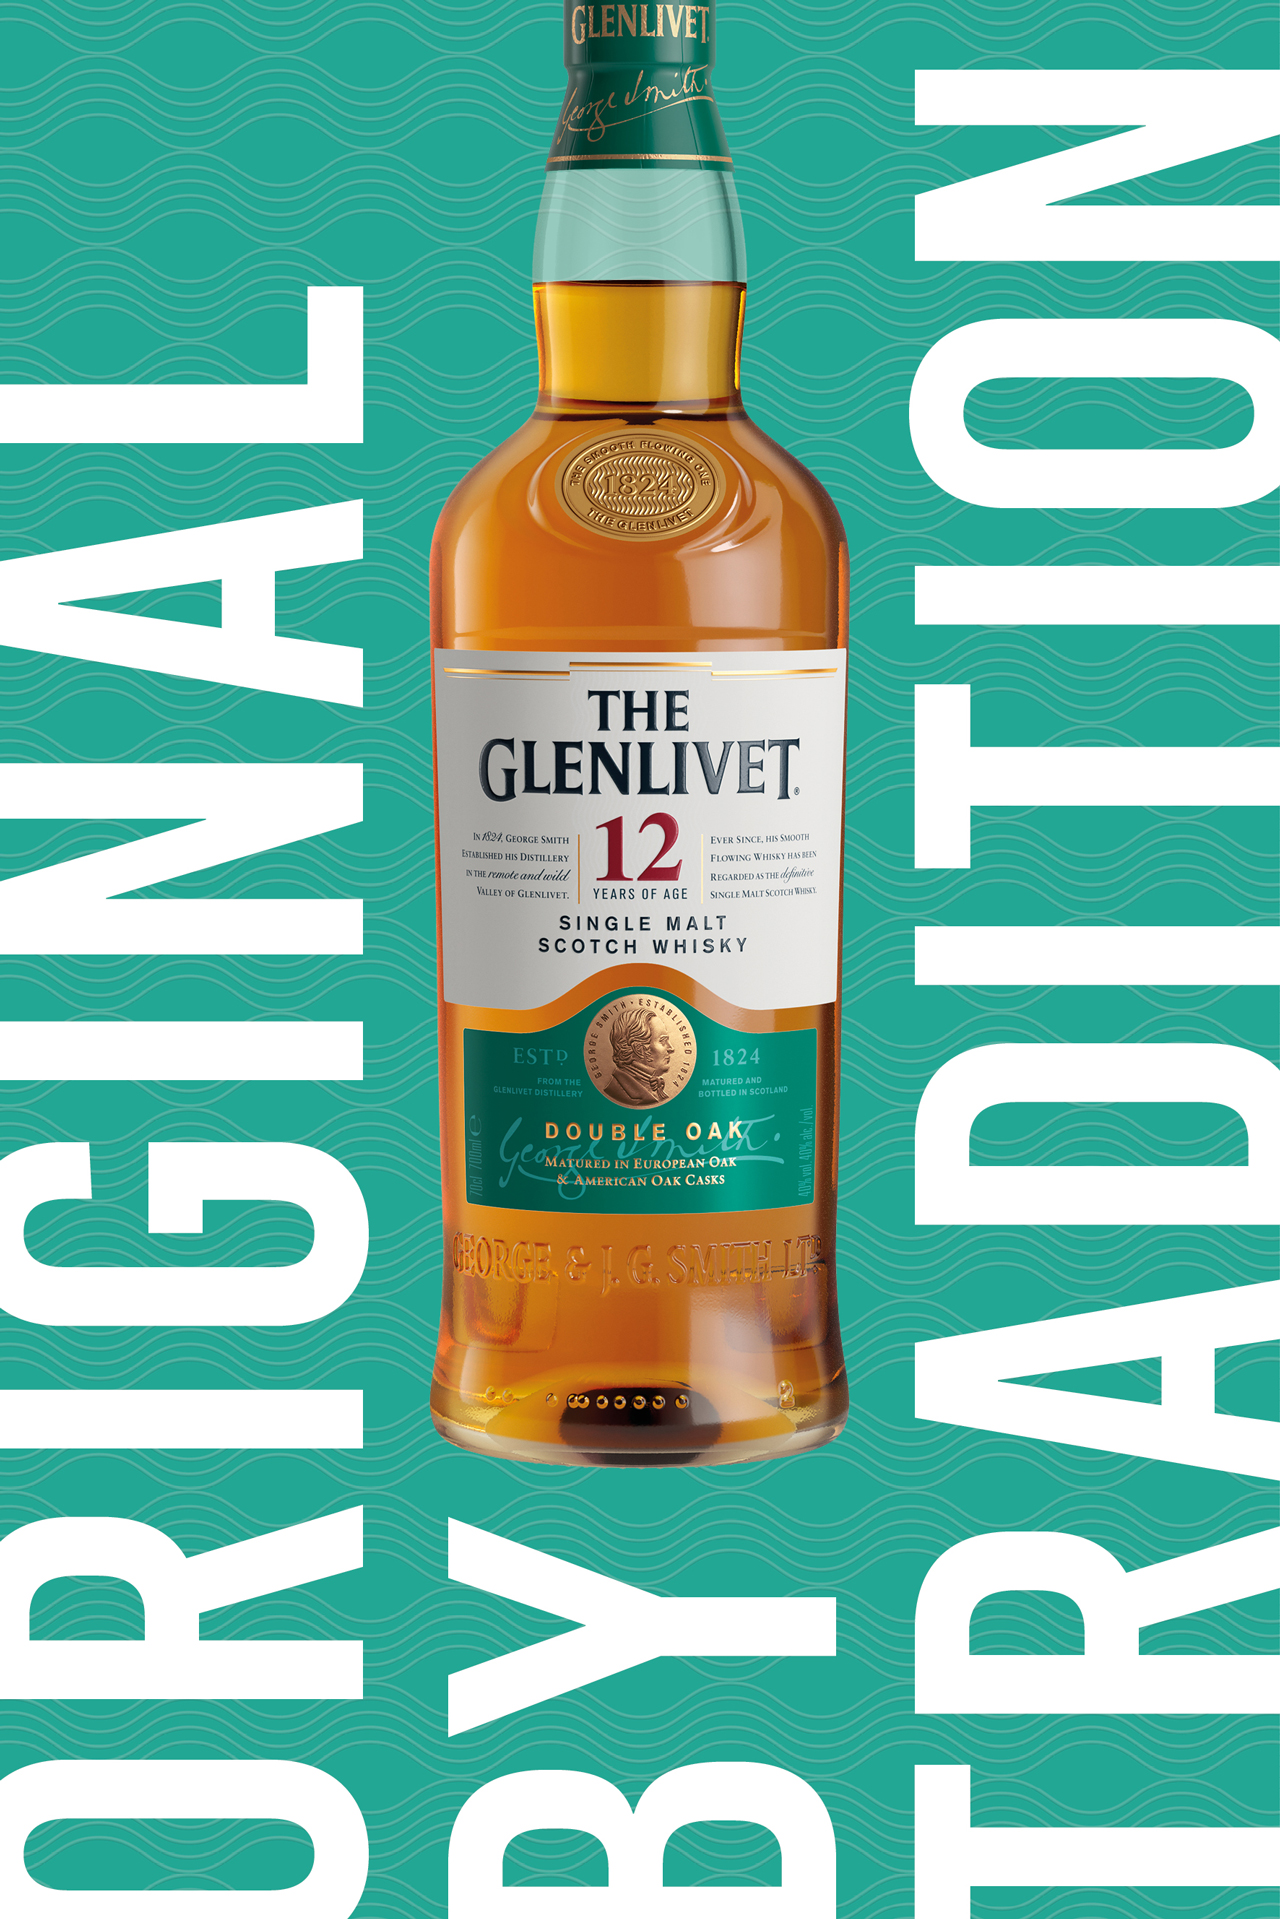 Bottle of The Glenlivet 12yo on Turqoise background "Original by Tradition" Camapaign